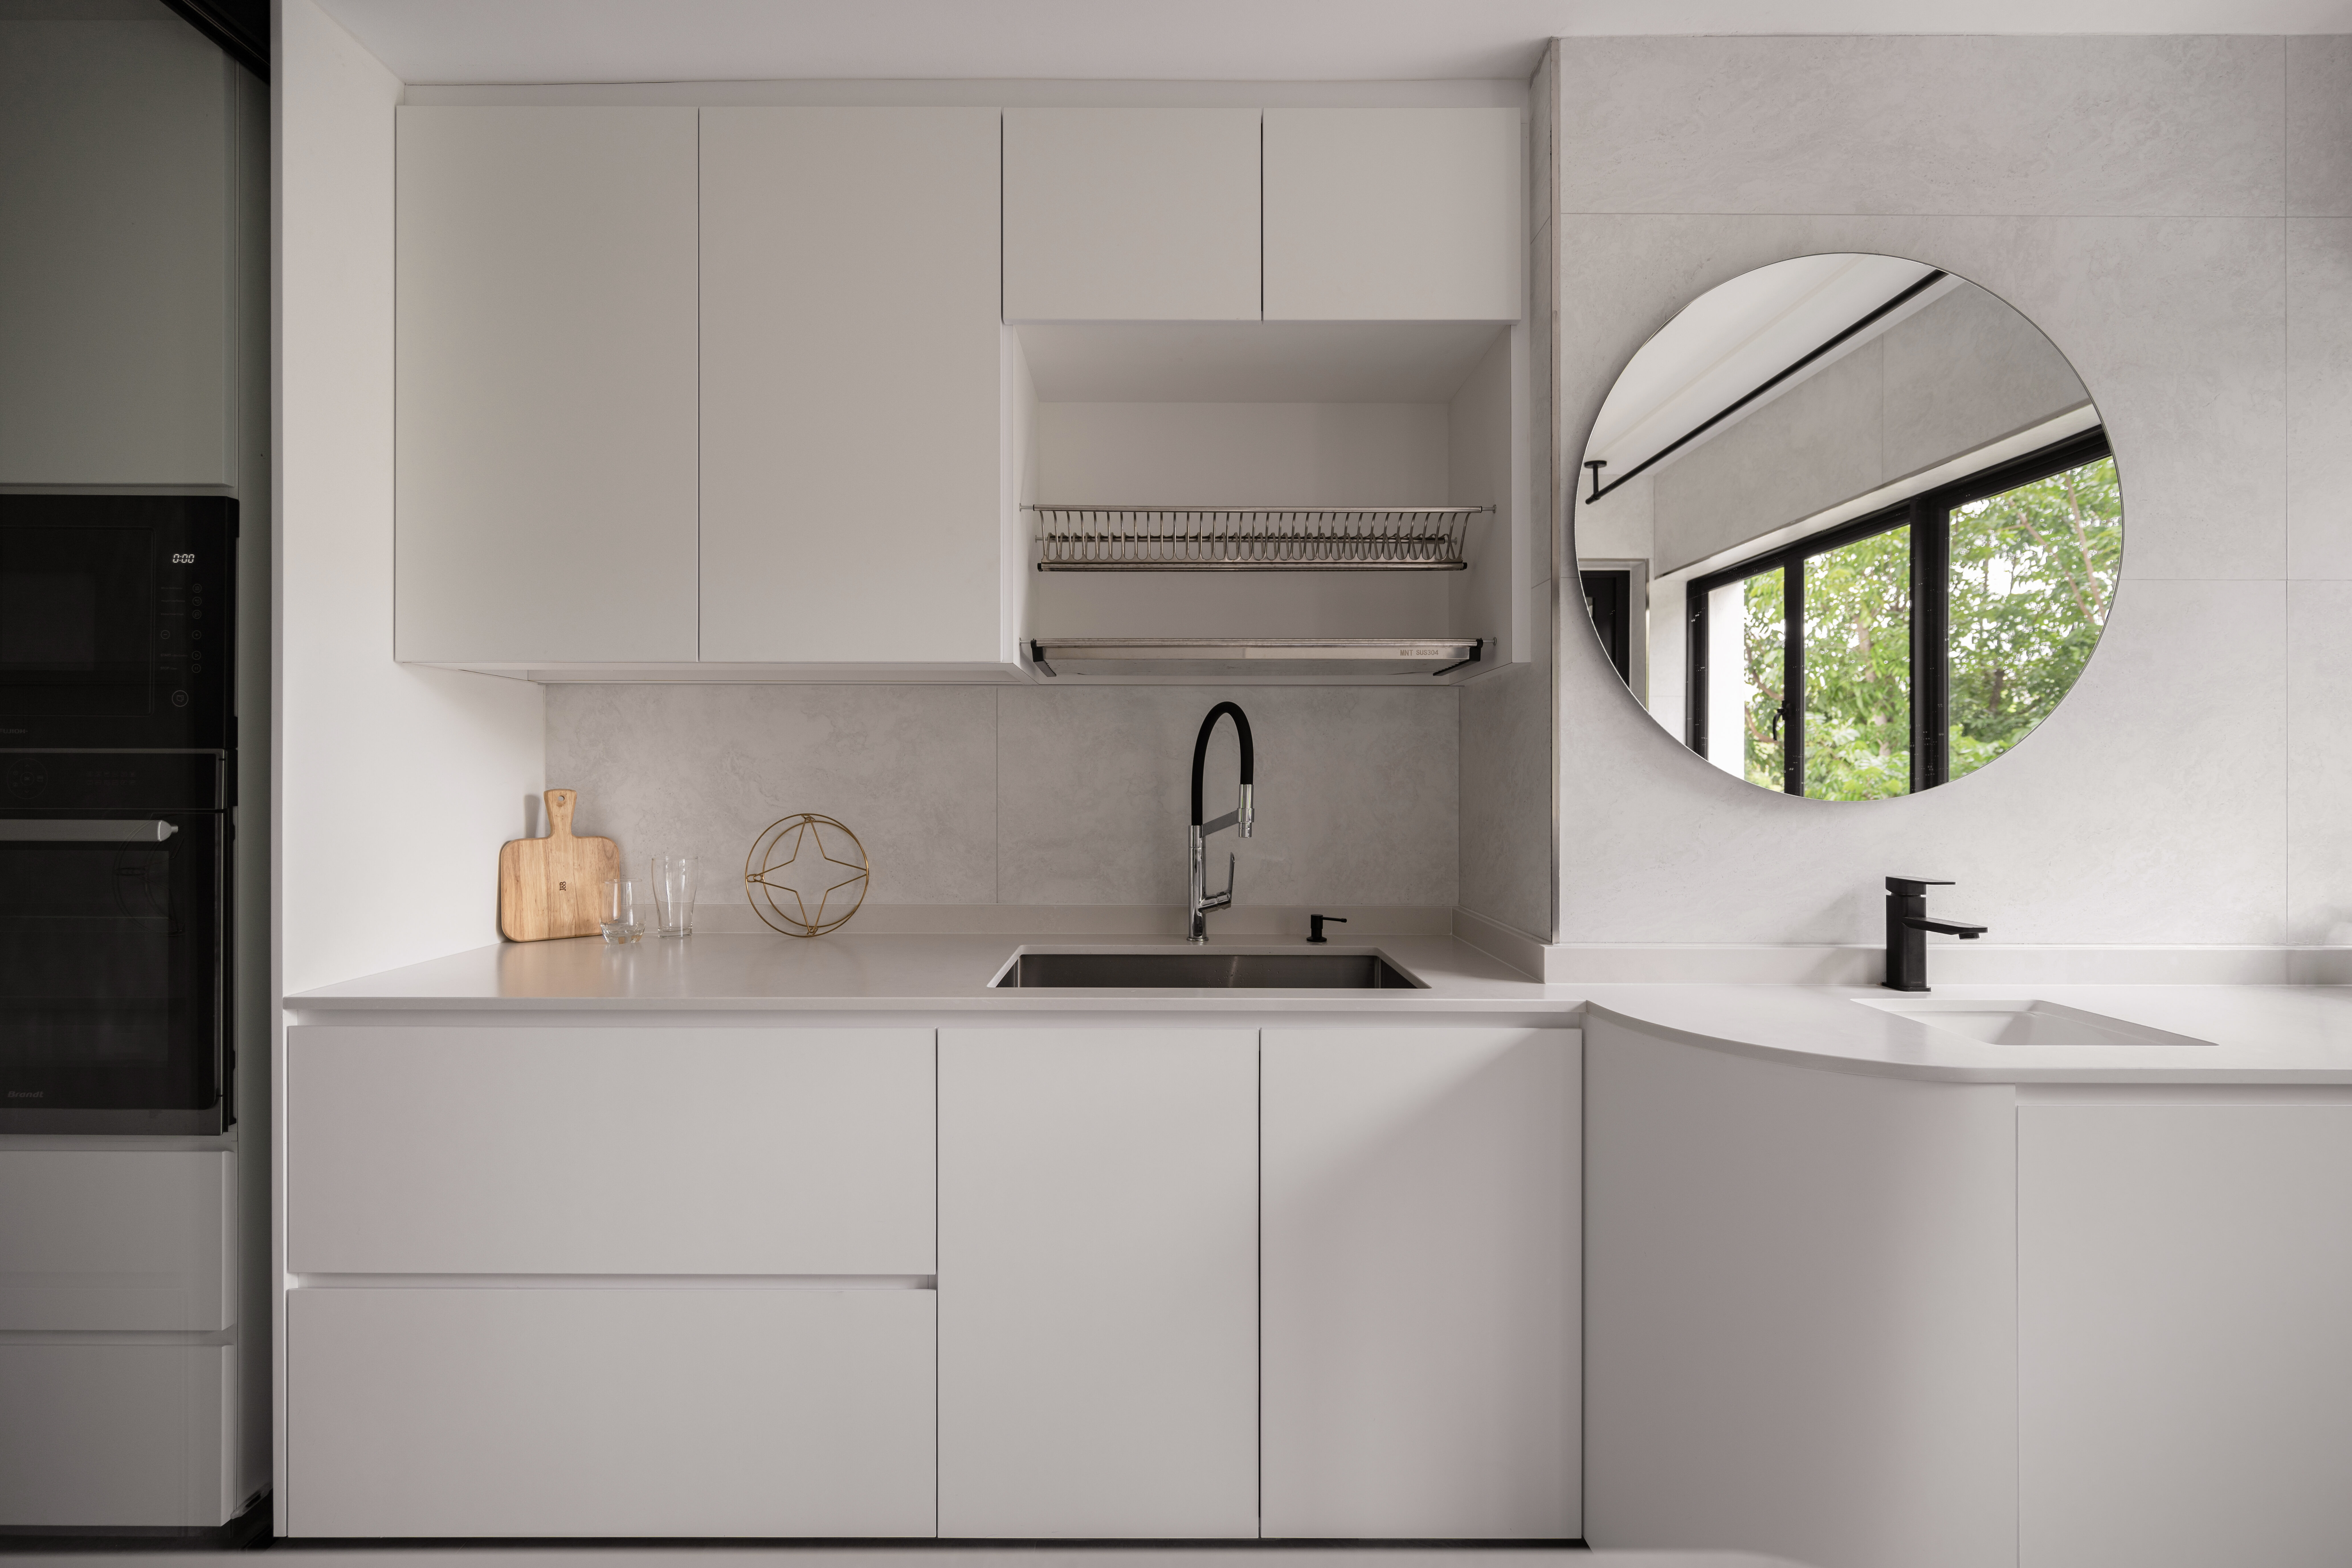 Small Kitchen Design Ideas For Your Hdb